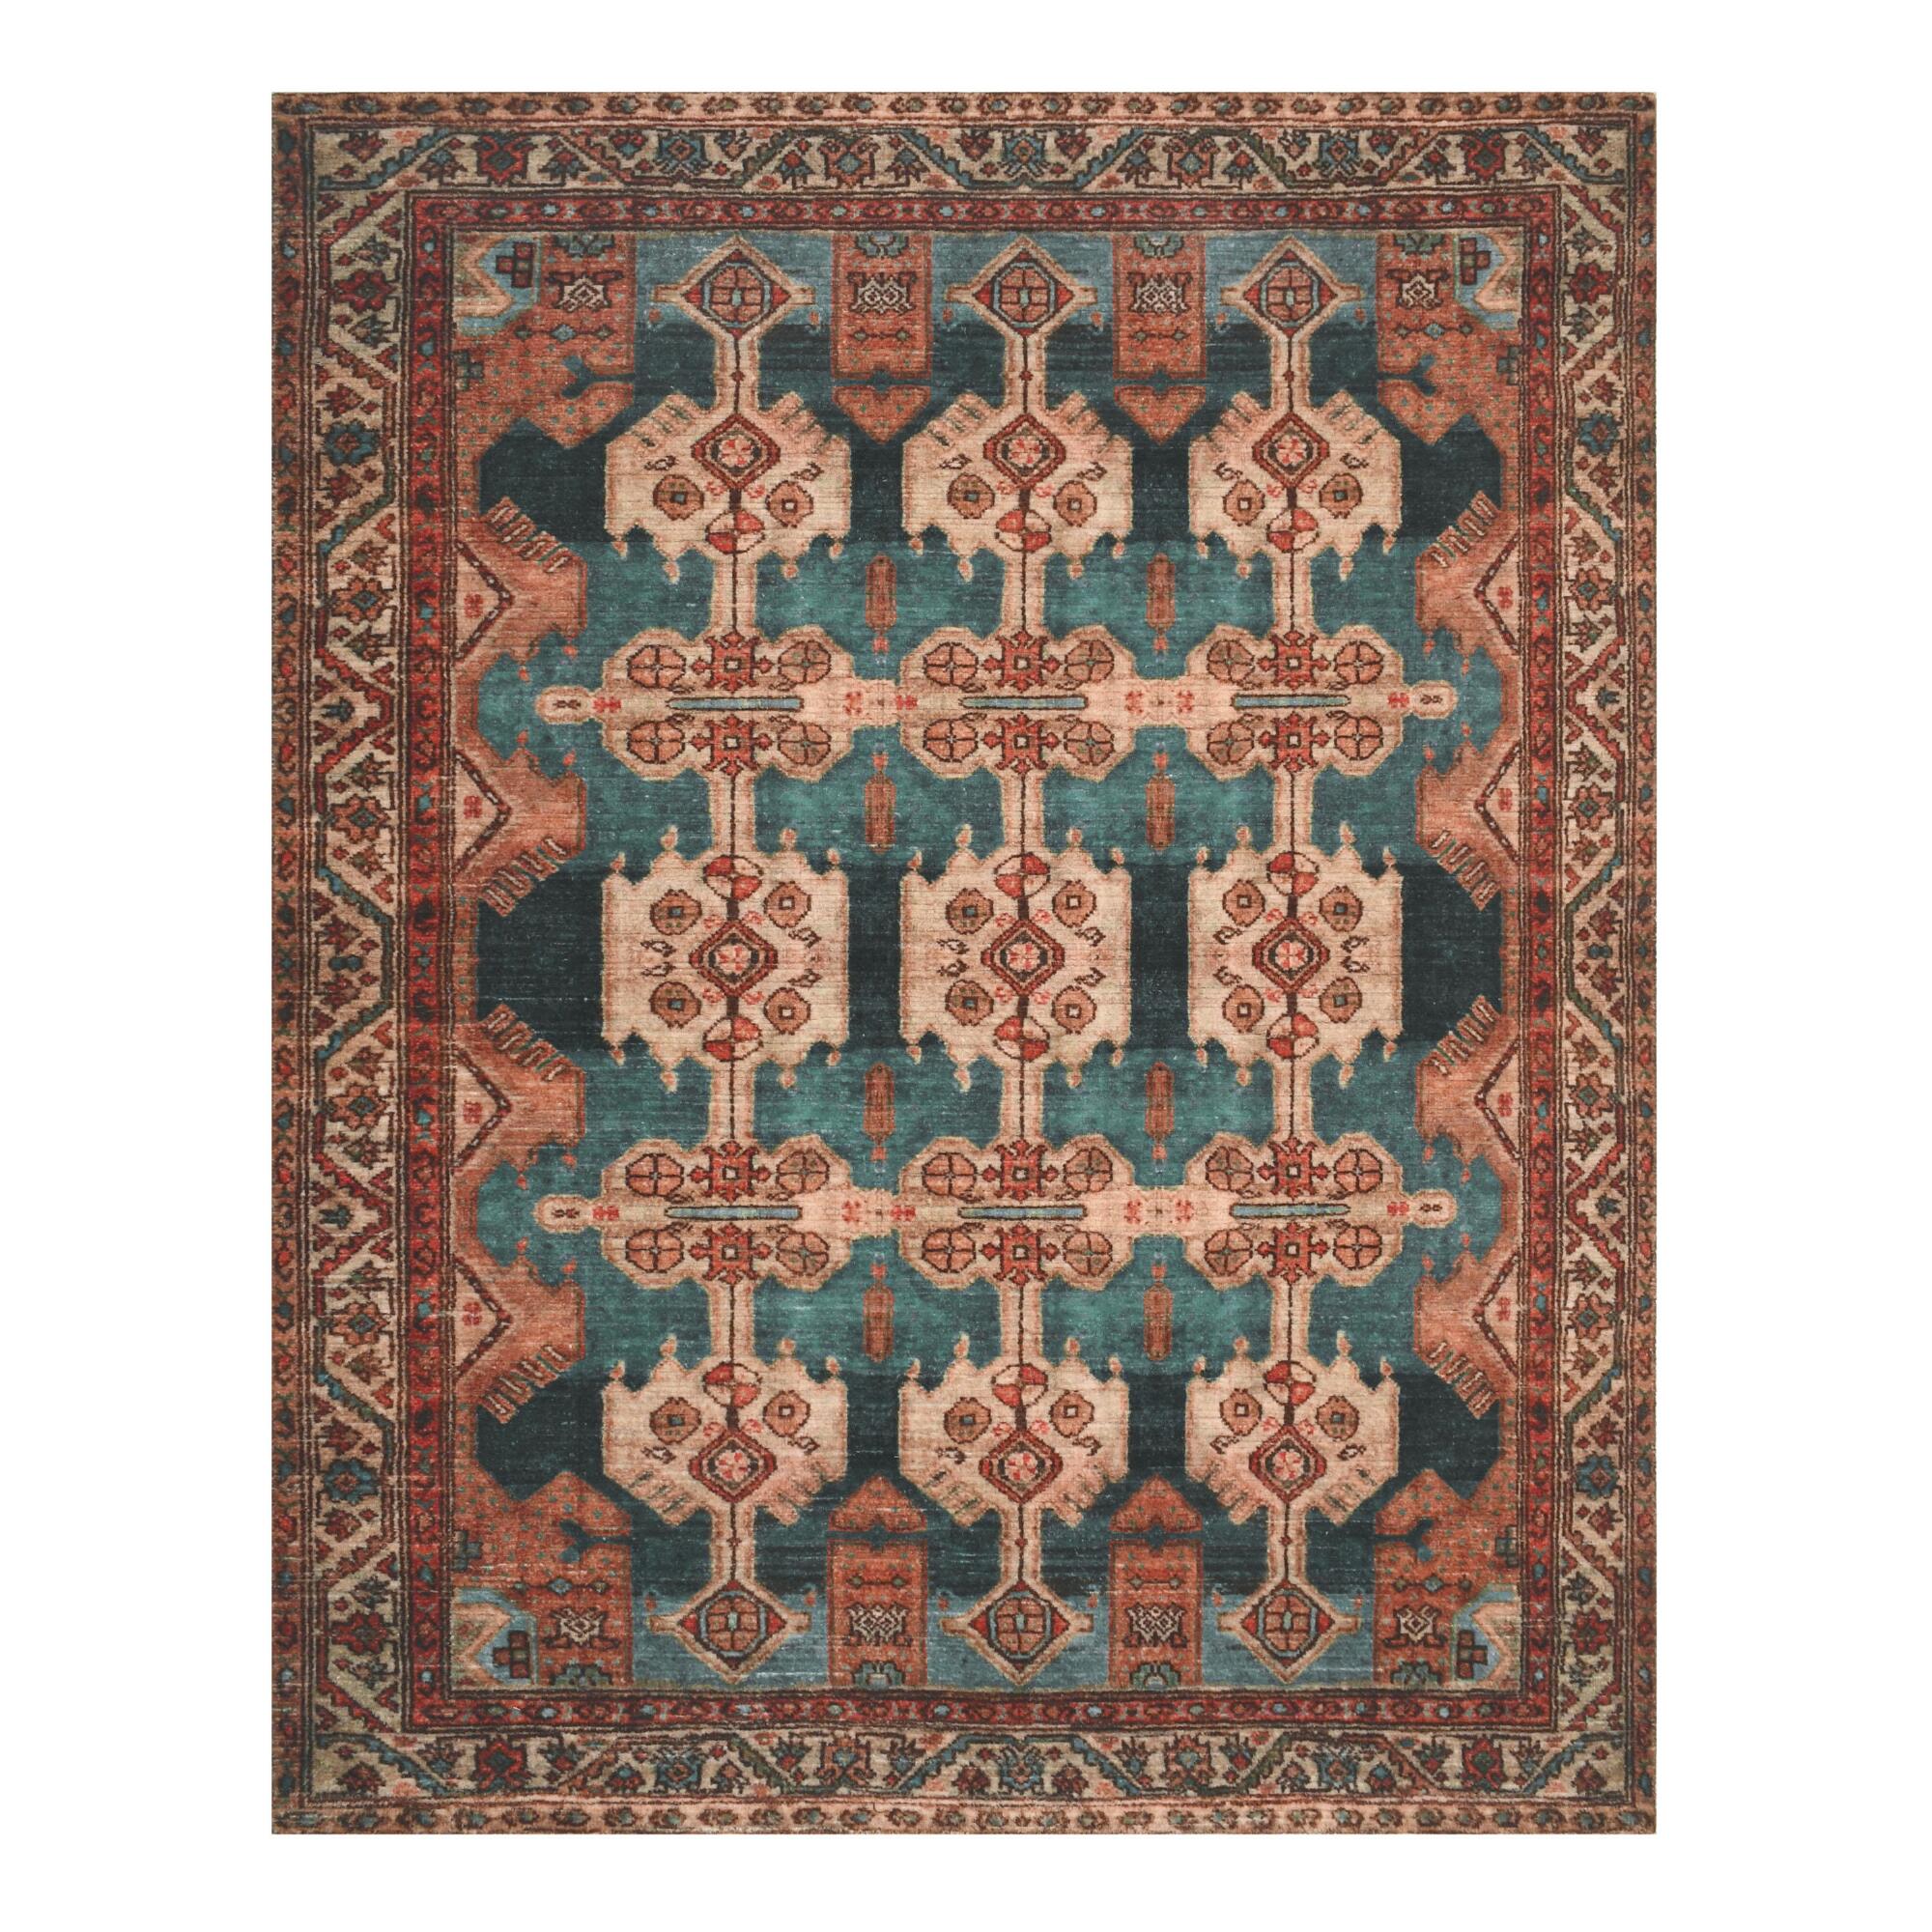 Coral Persian Style Zara Area Rug: Pink - Nylon - 8' x 10' by World Market